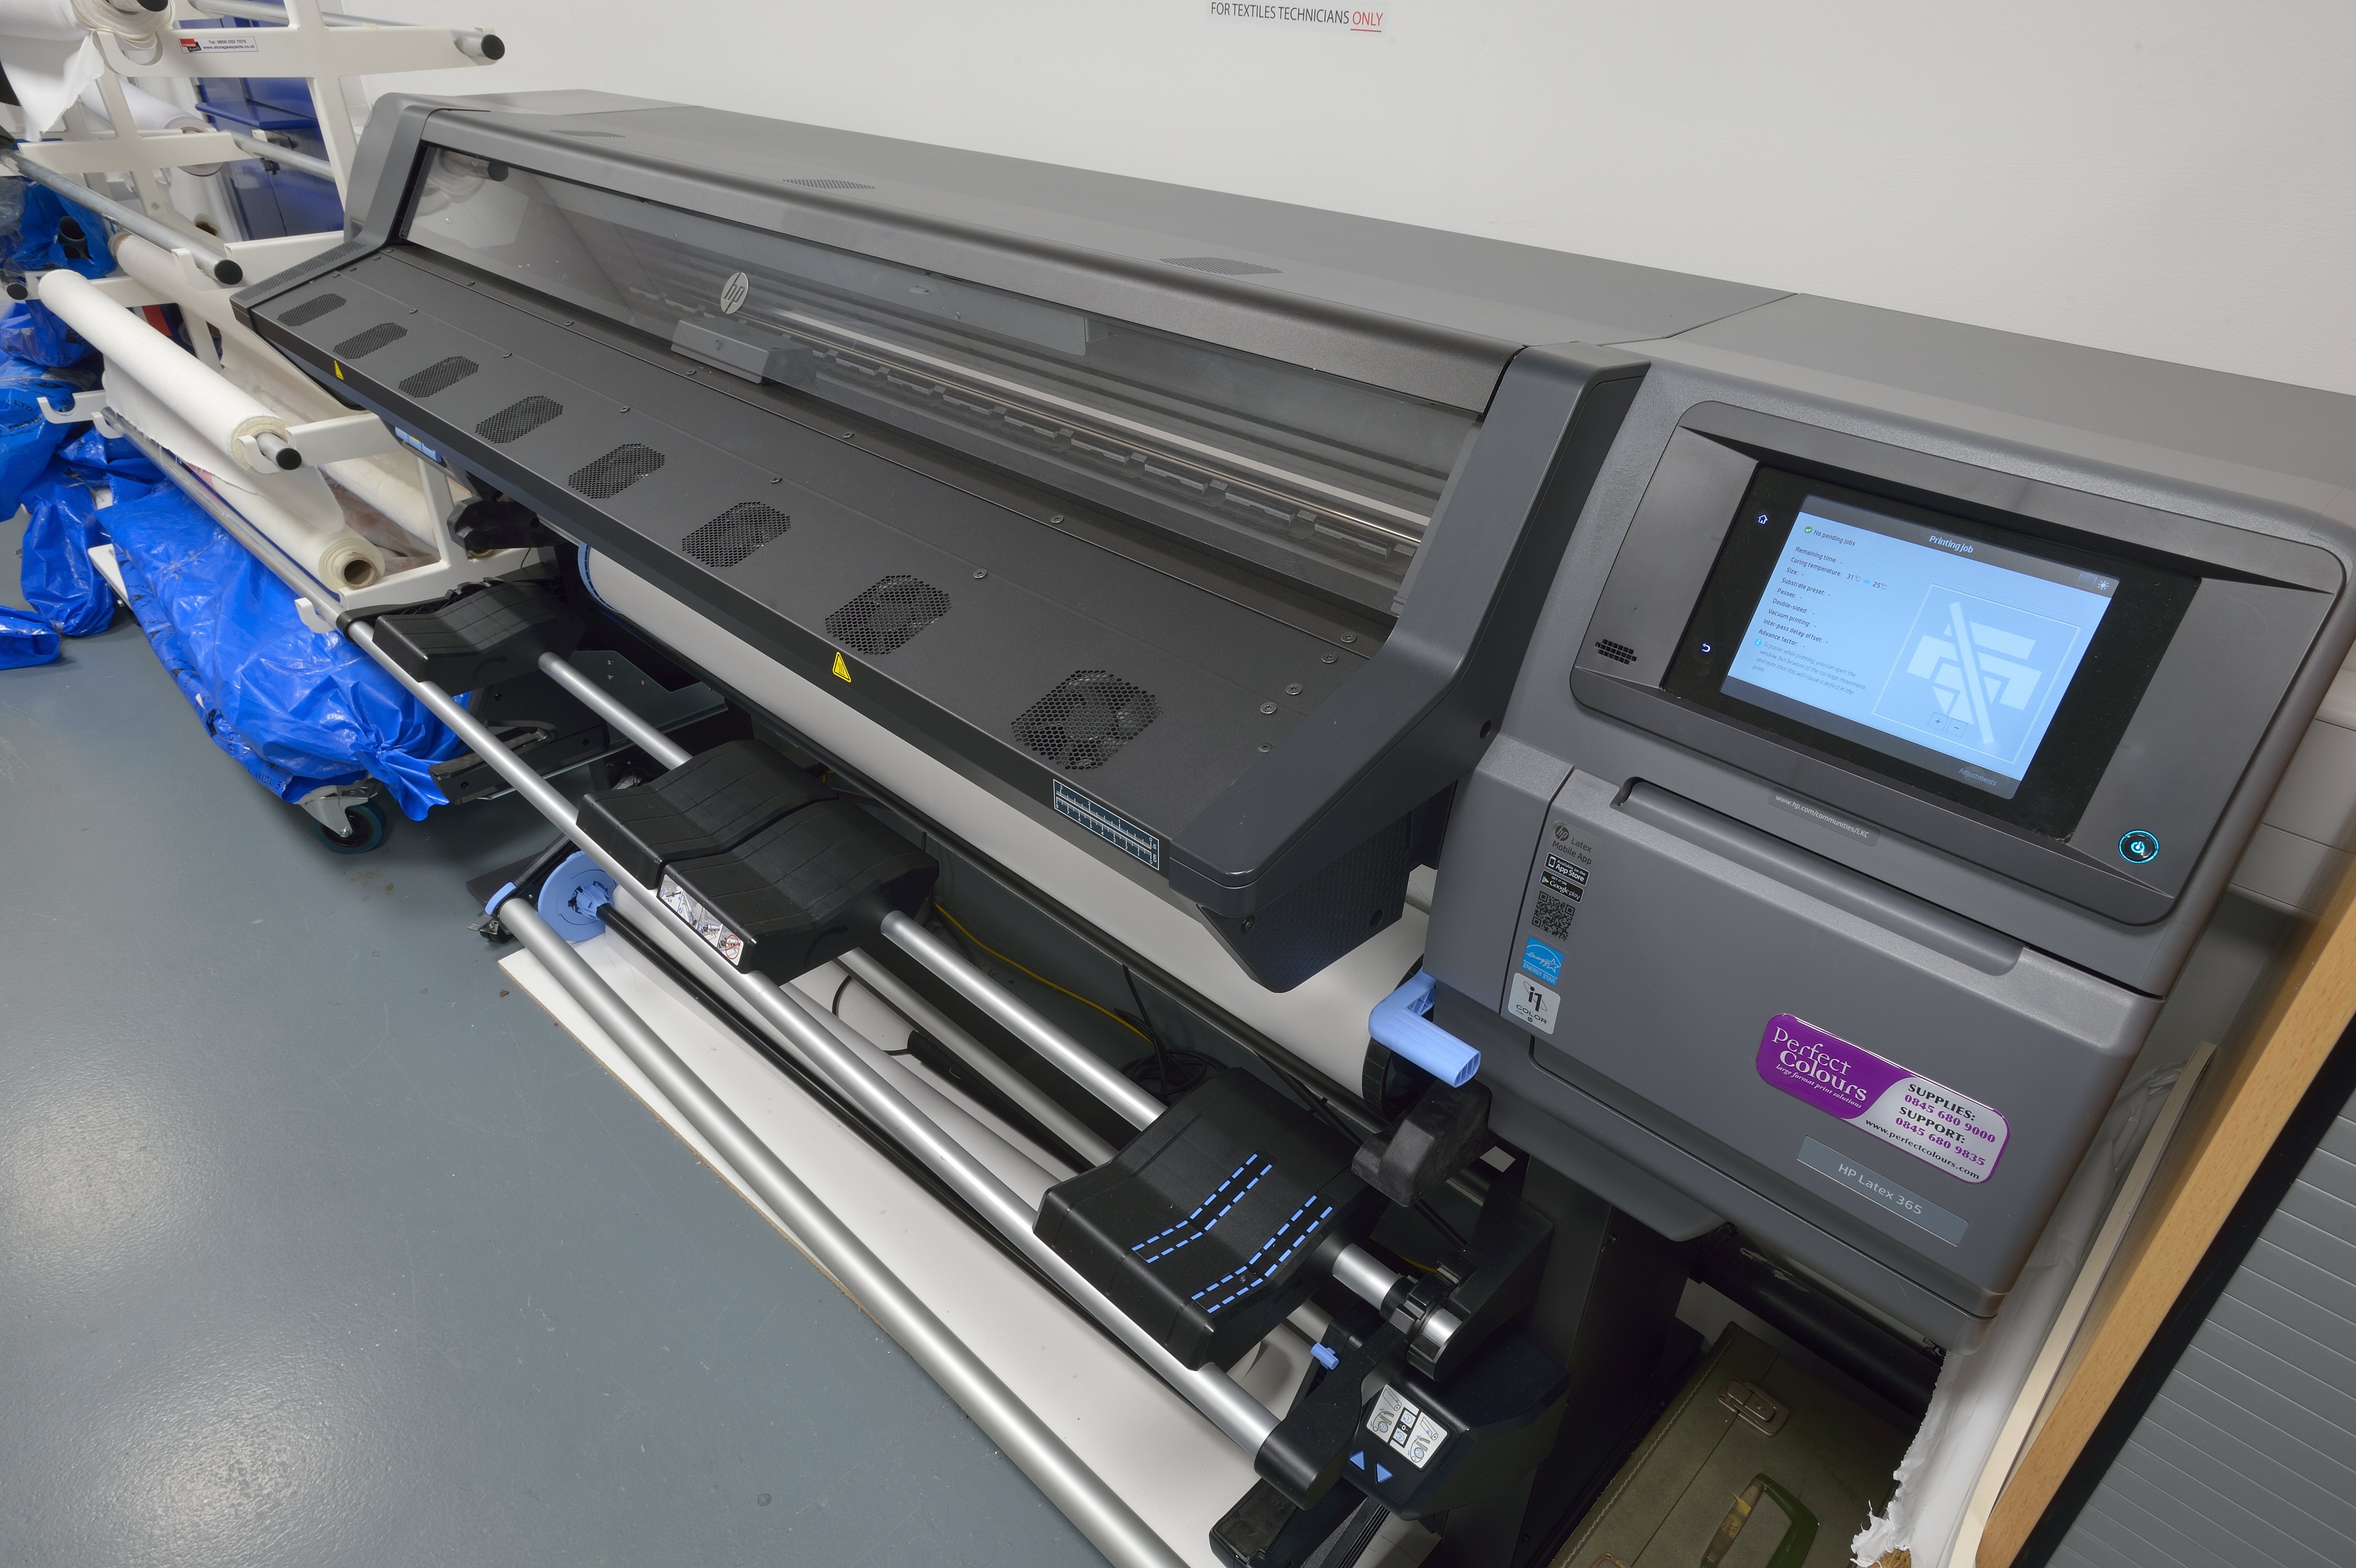 From the University of Bolton, Large Format HP Printer